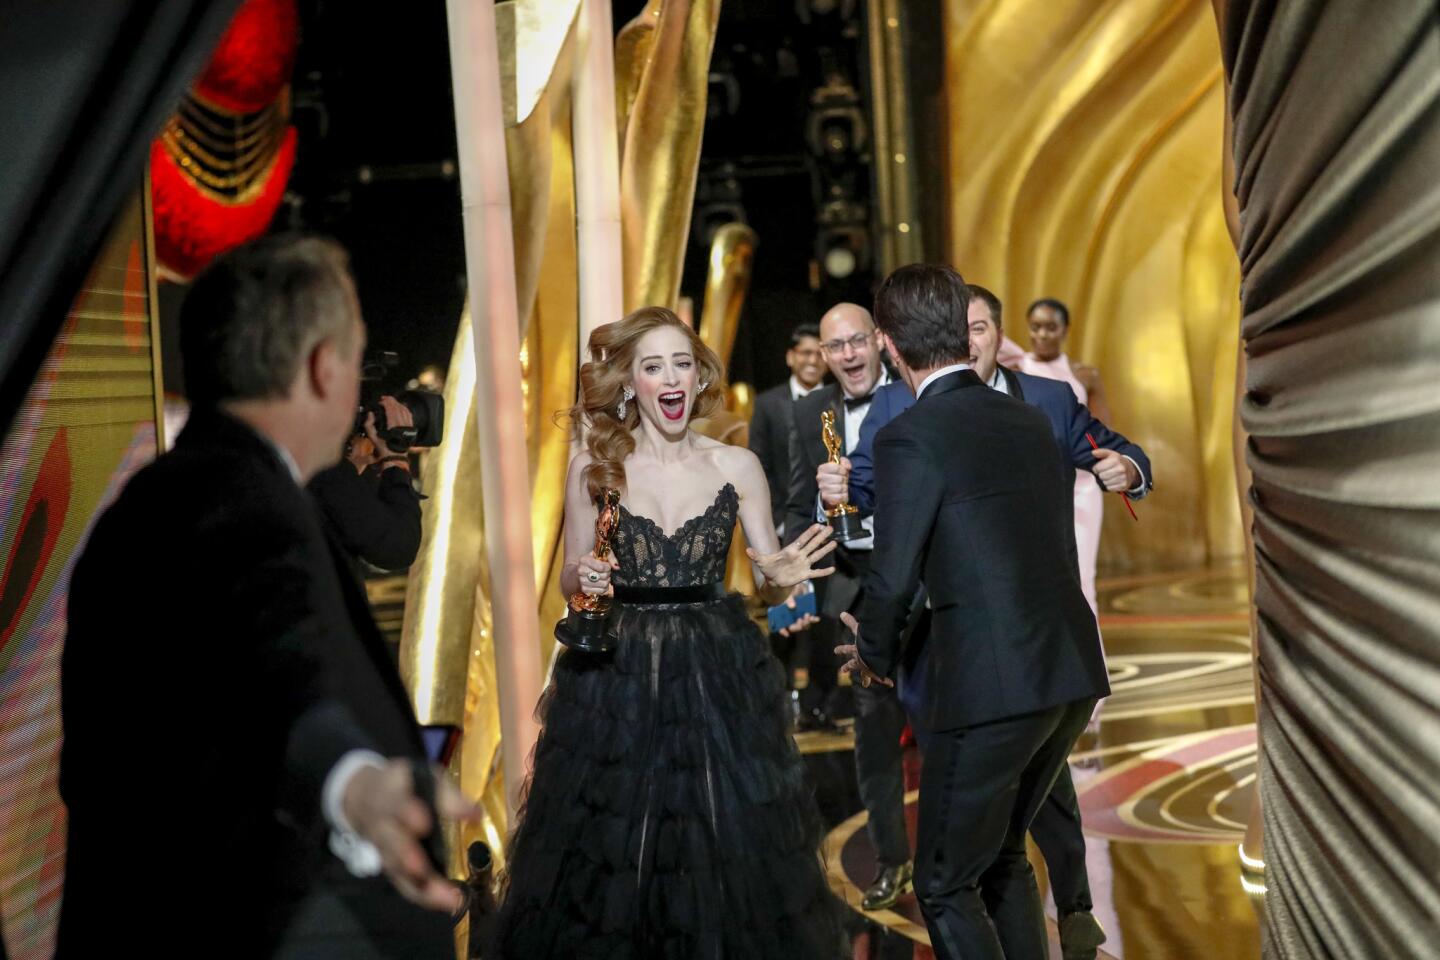 Jaime Ray Newman is jubilant after winning the short film award for "Skin" at the 91st Academy Awards on Sunday.